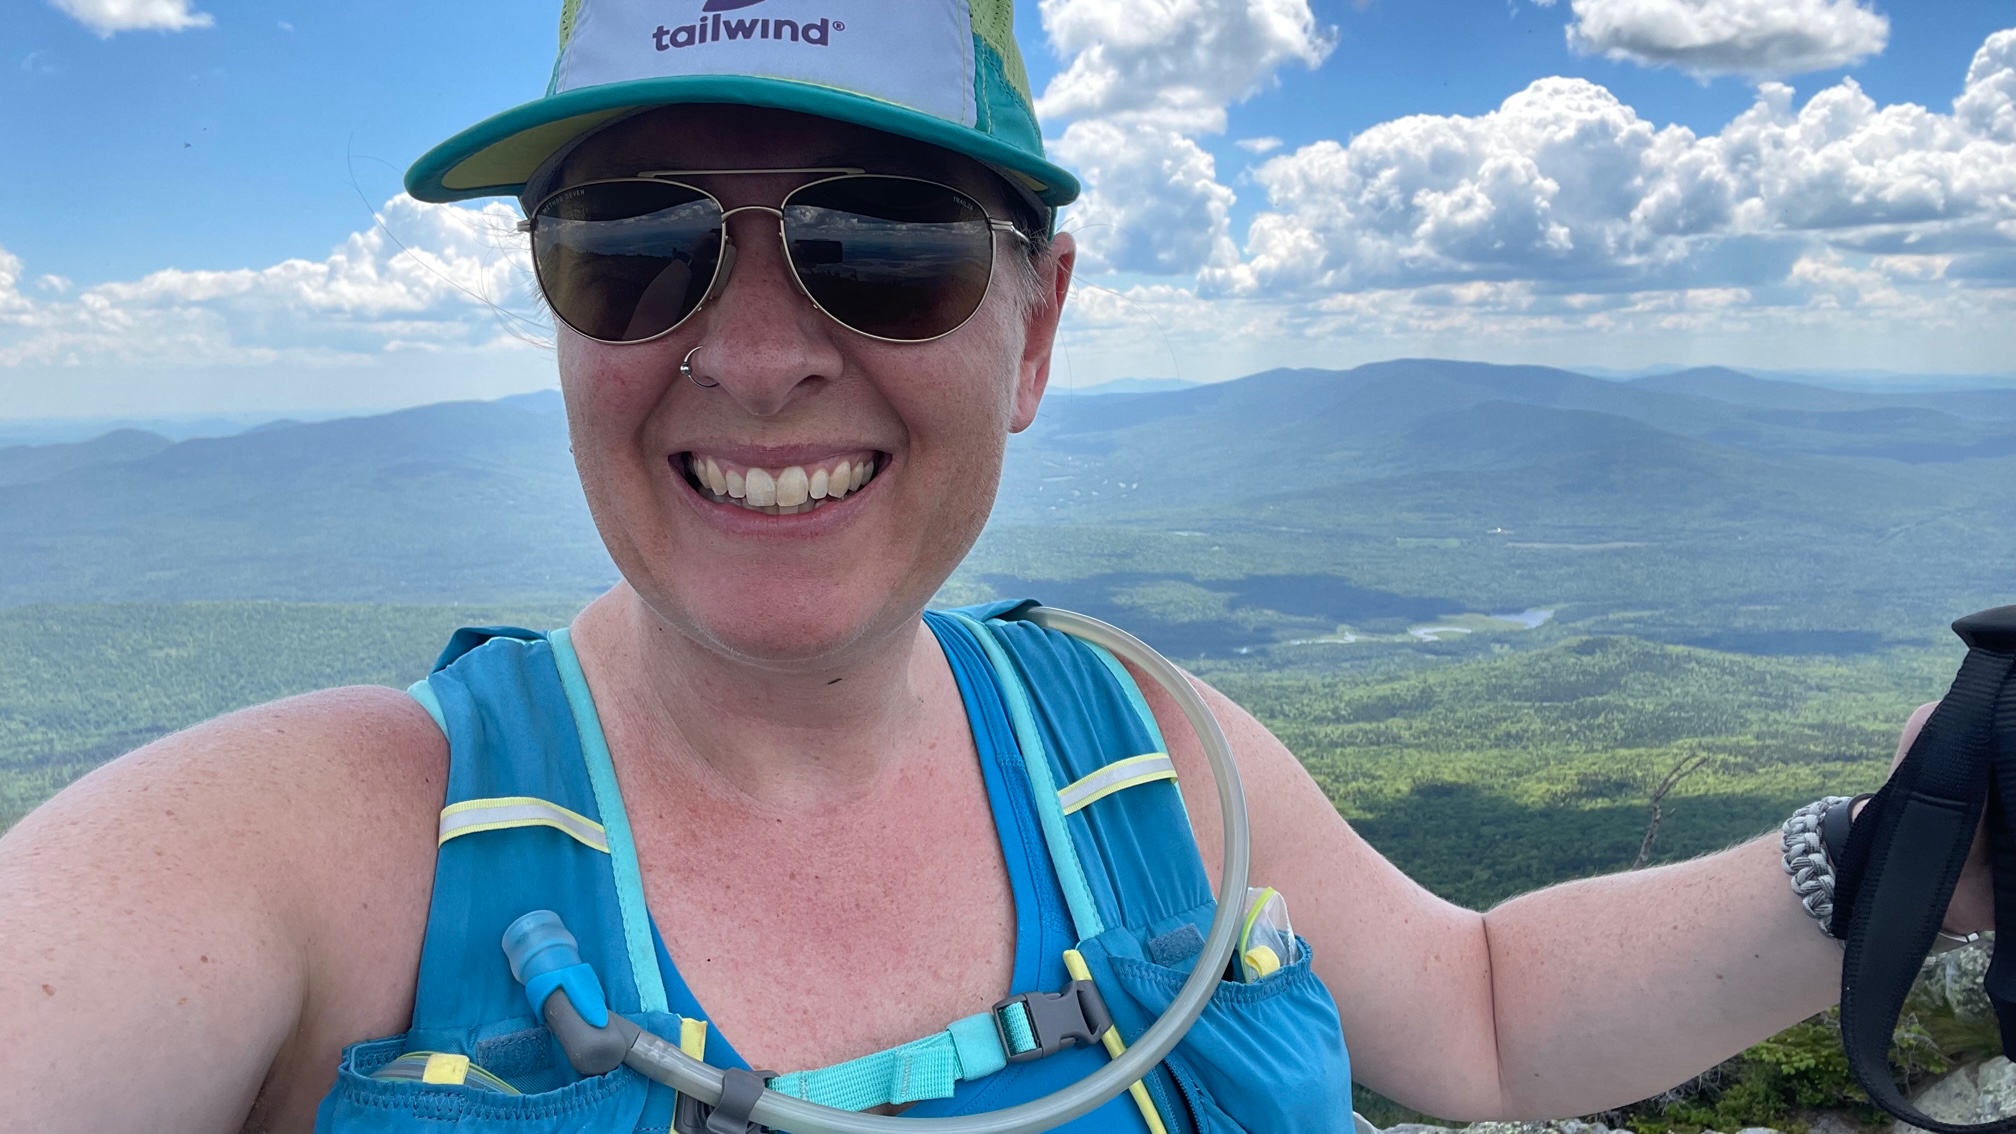 Spent a 13-hour day in the mountains, thanks to good nutrition and a menstrual cup.